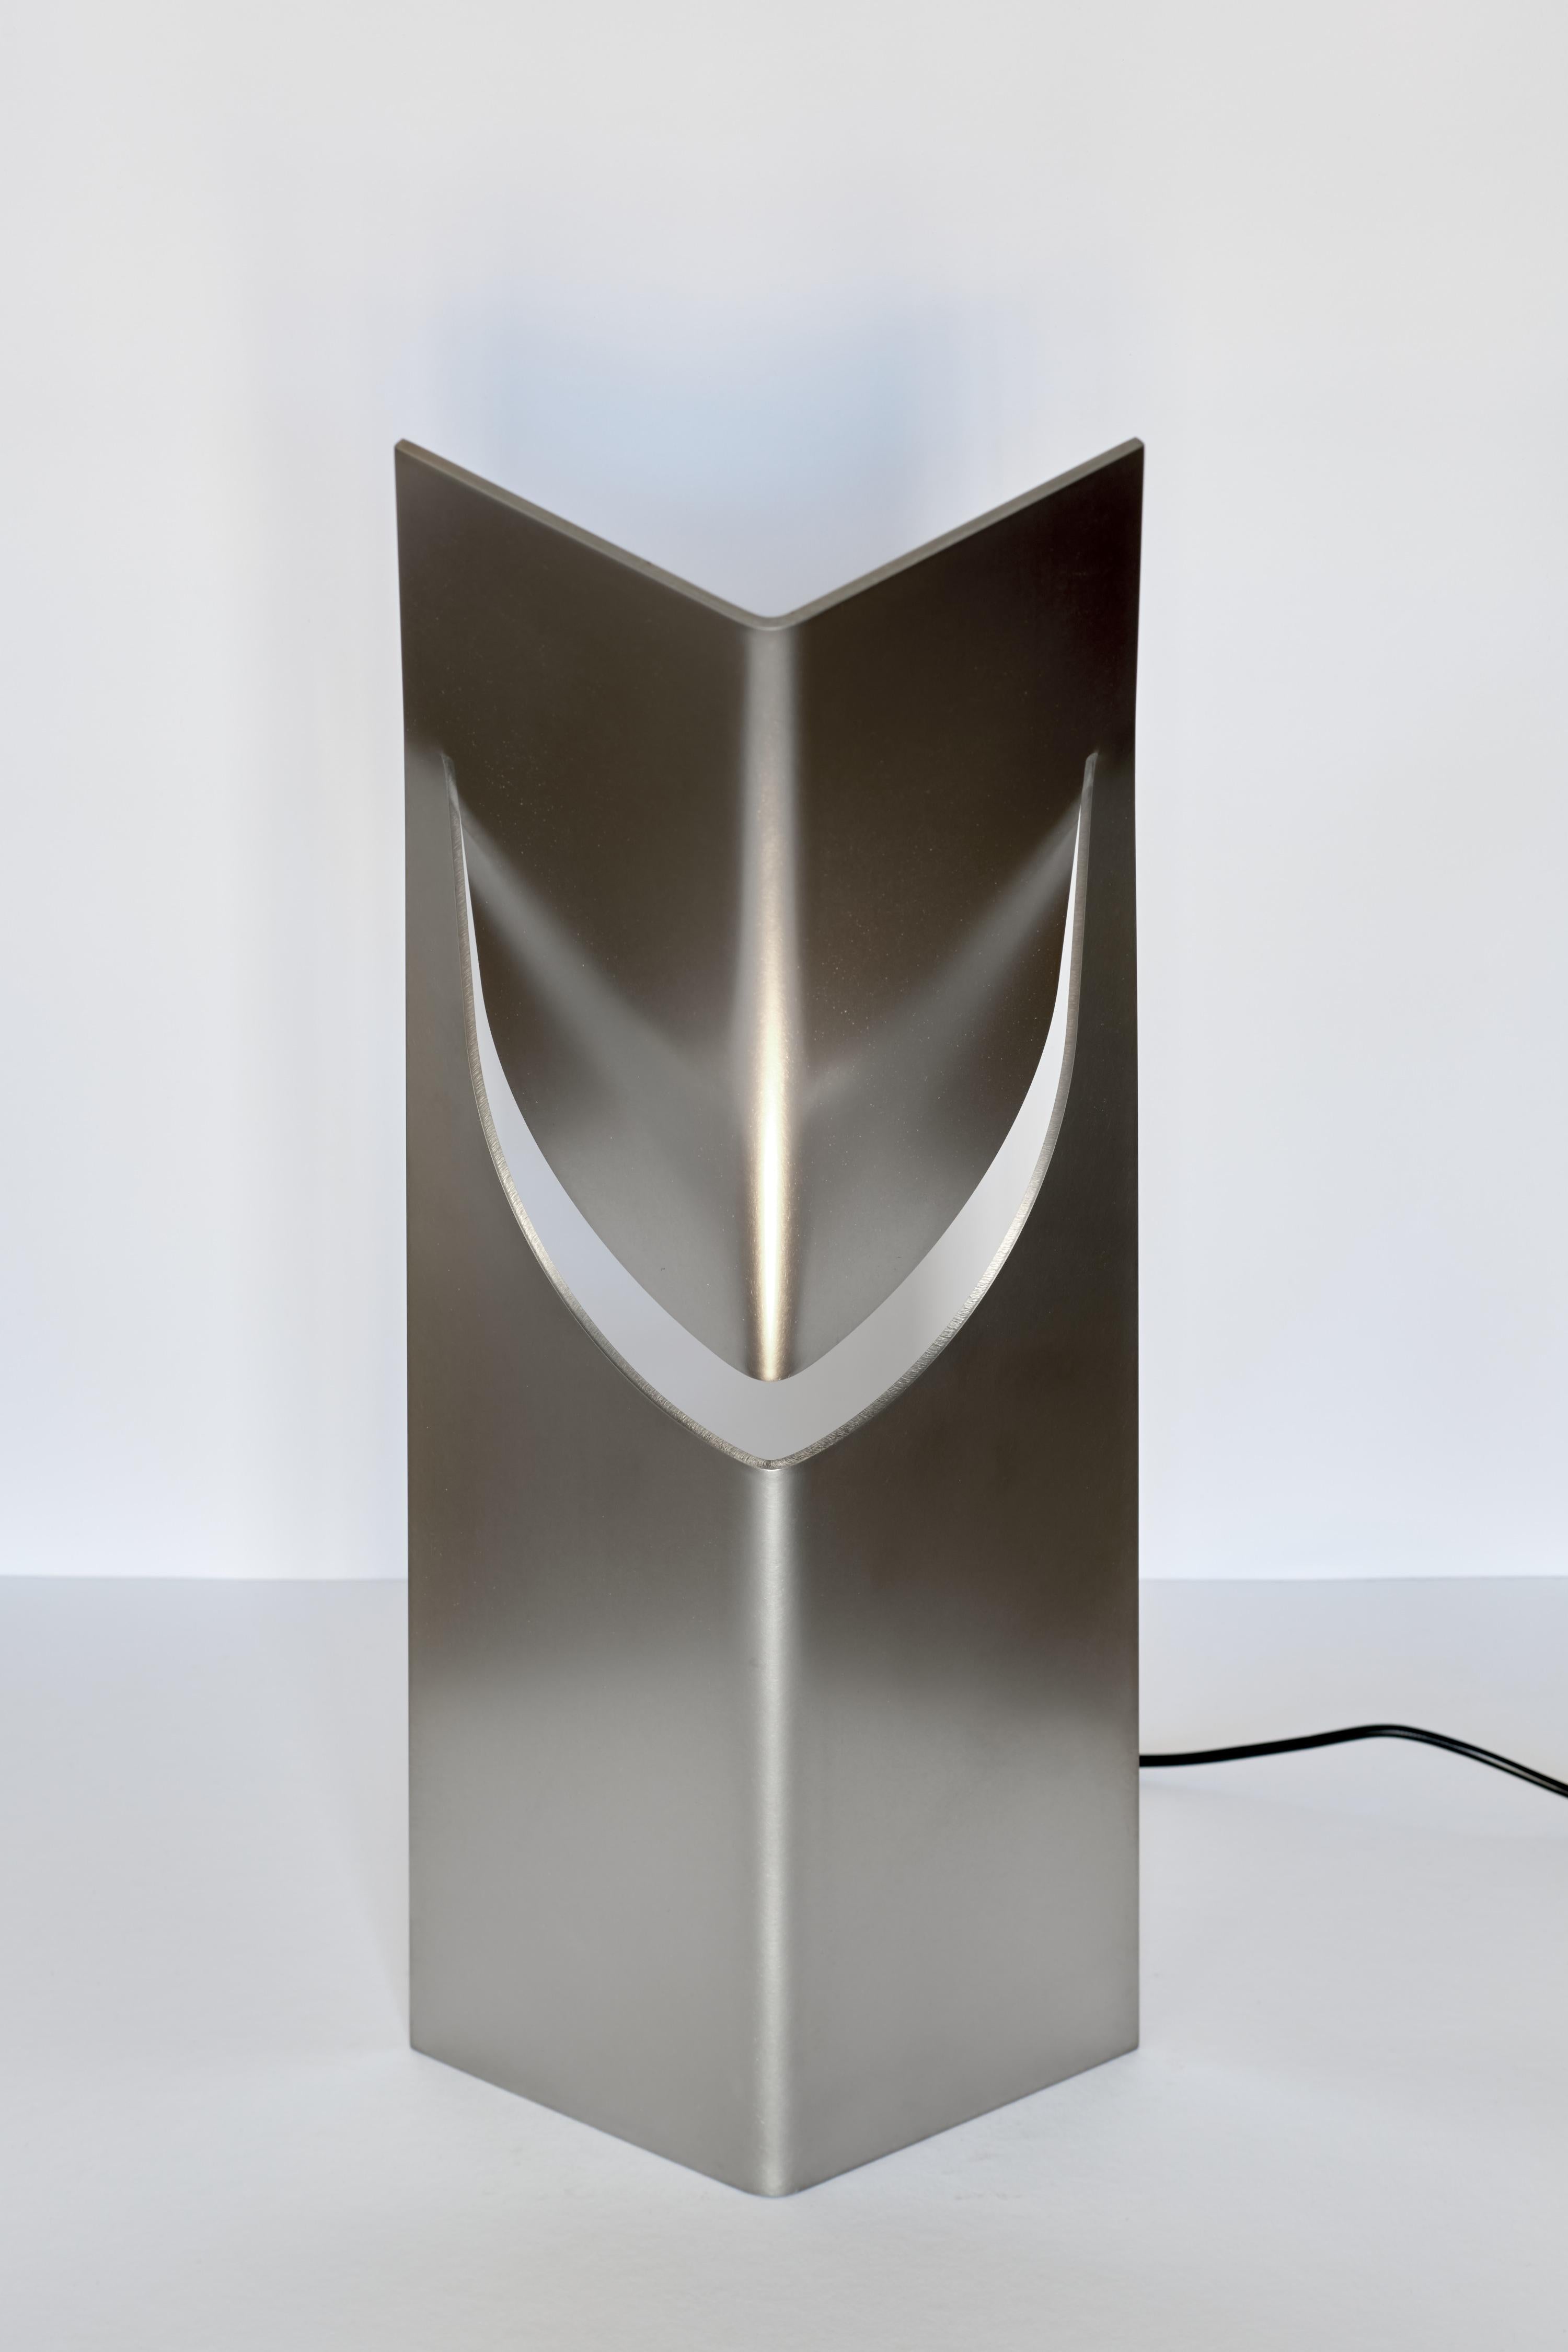 The ONE Table Light collection by Frank Penders for Form Editions is a series of lights that combine an ingenious simplicity of form with a richness of light and material texture. Featuring a hand brushed stainless steel design, this table light is